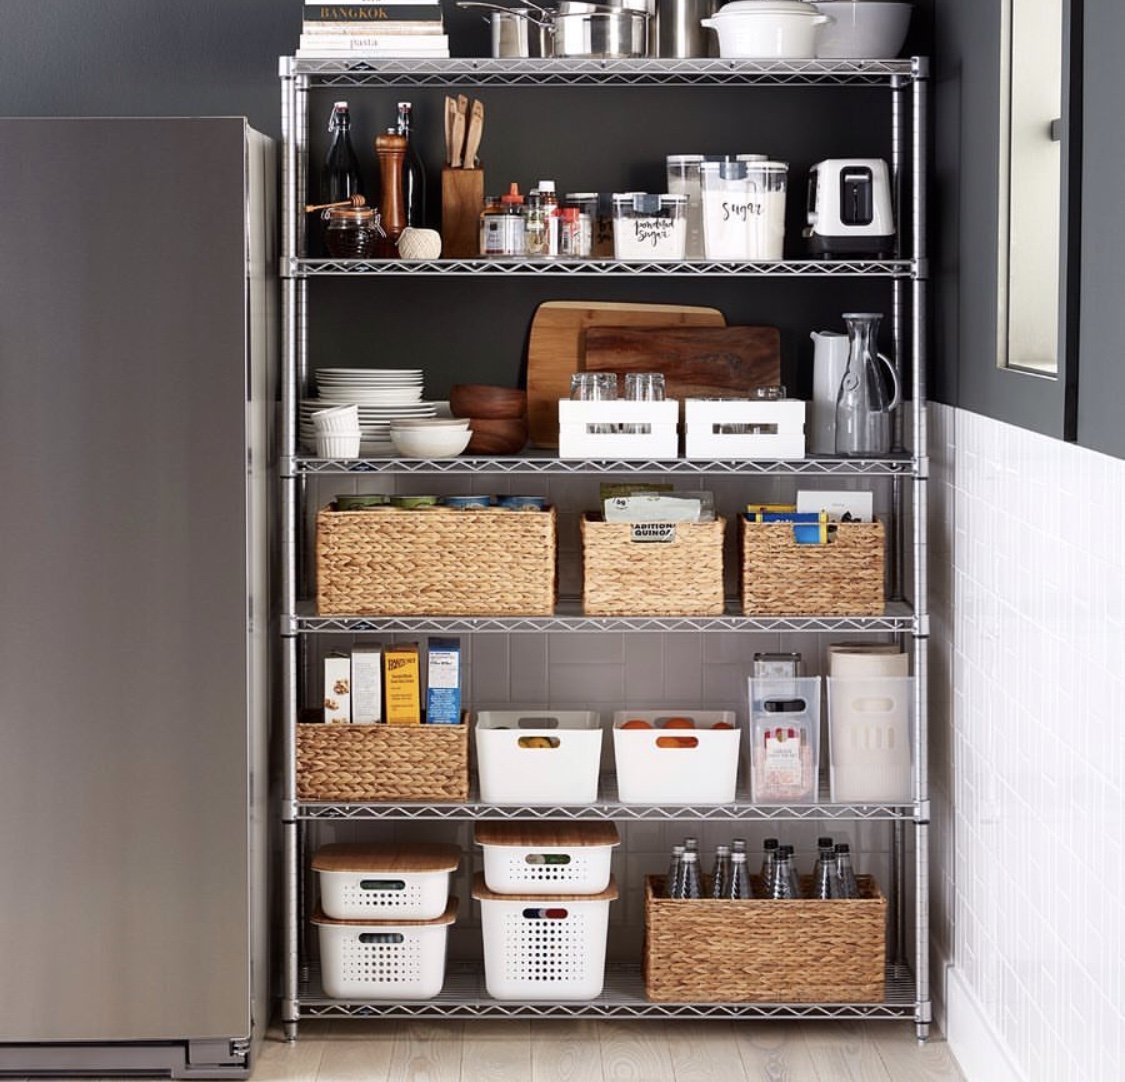 Stacey Crew Wellness Kitchen Organization Ikea Containers